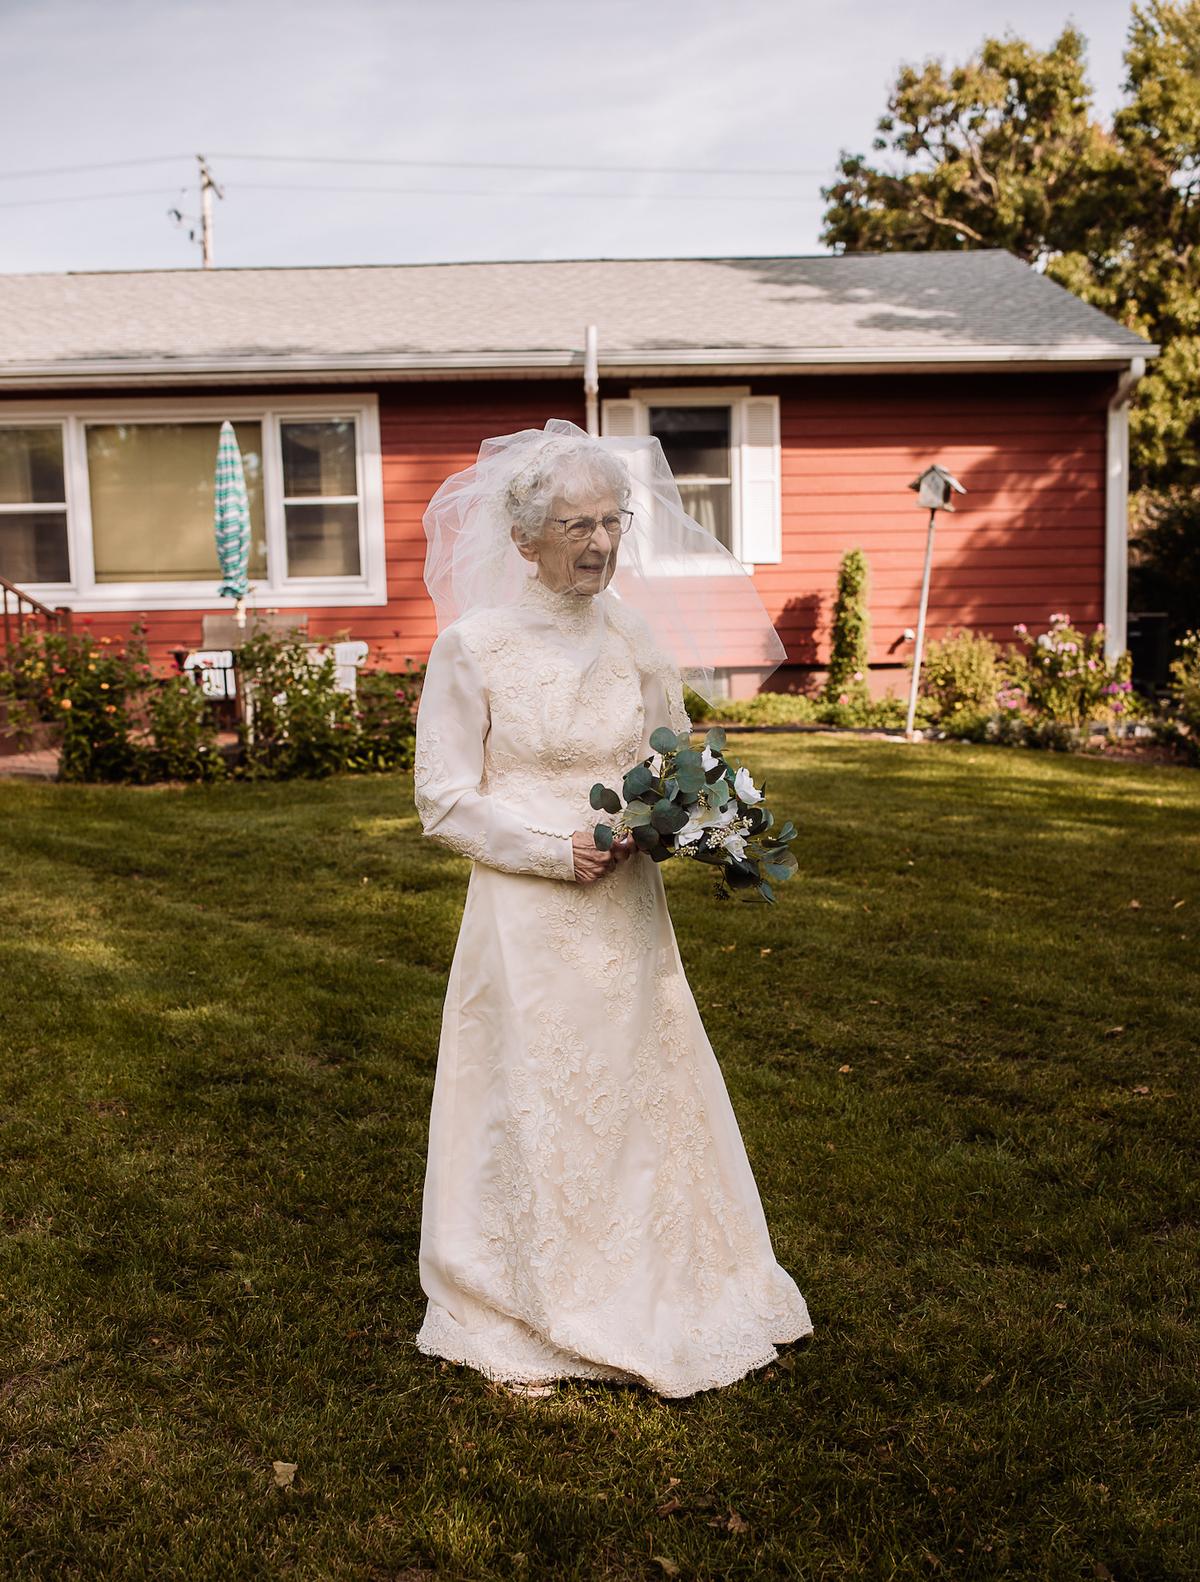 Frankie in her wedding gown. (Courtesy of <a href="http://www.stcroixhospice.com/">St. Croix Hospice</a>)